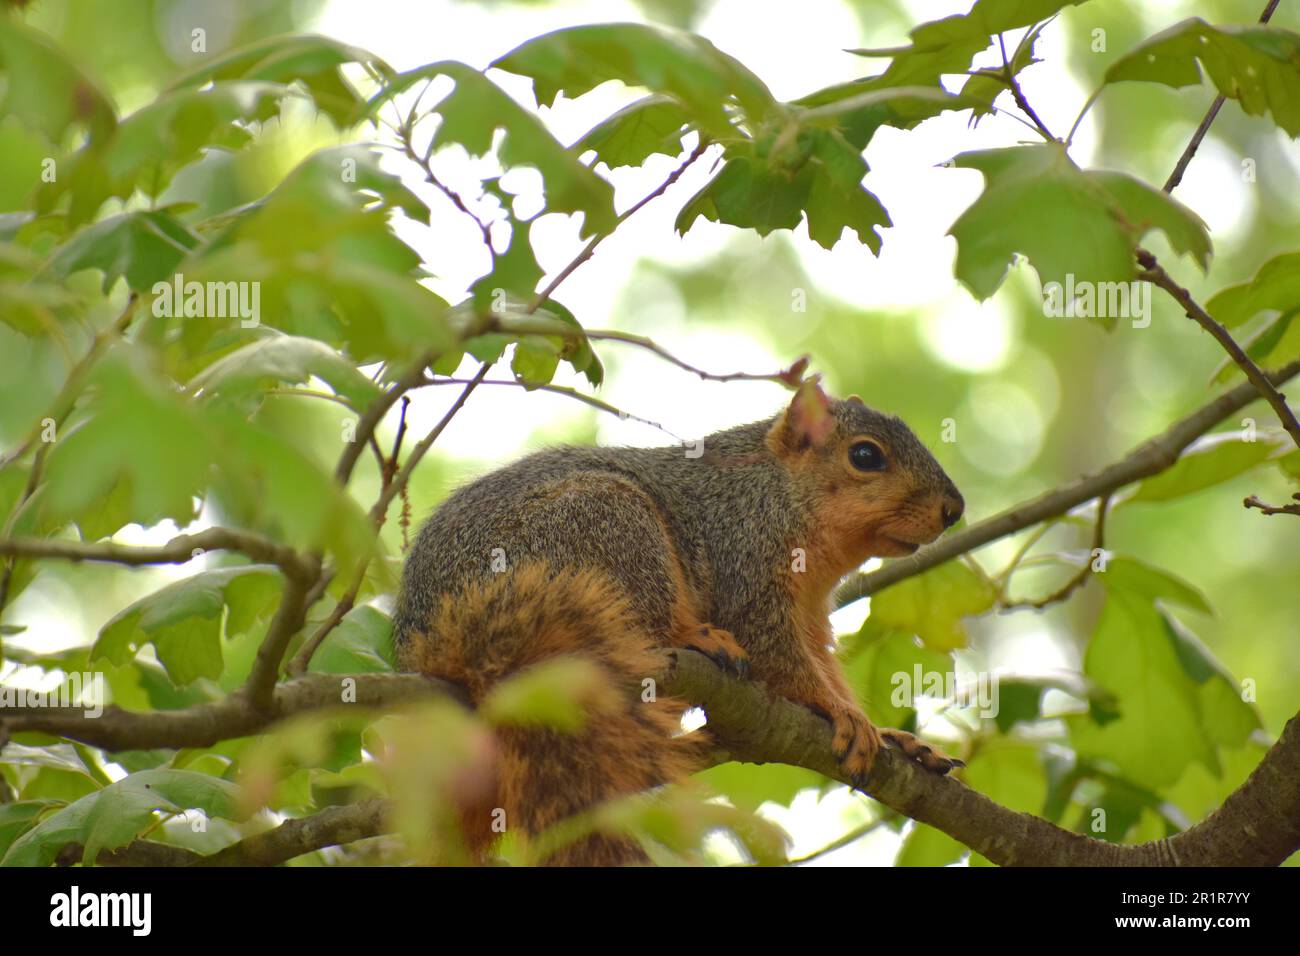 A Red (or Eastern) Fox Squirrel, sciurus niger, sits on a branch of an oak tree and cautiously watches the photographer. Stock Photo